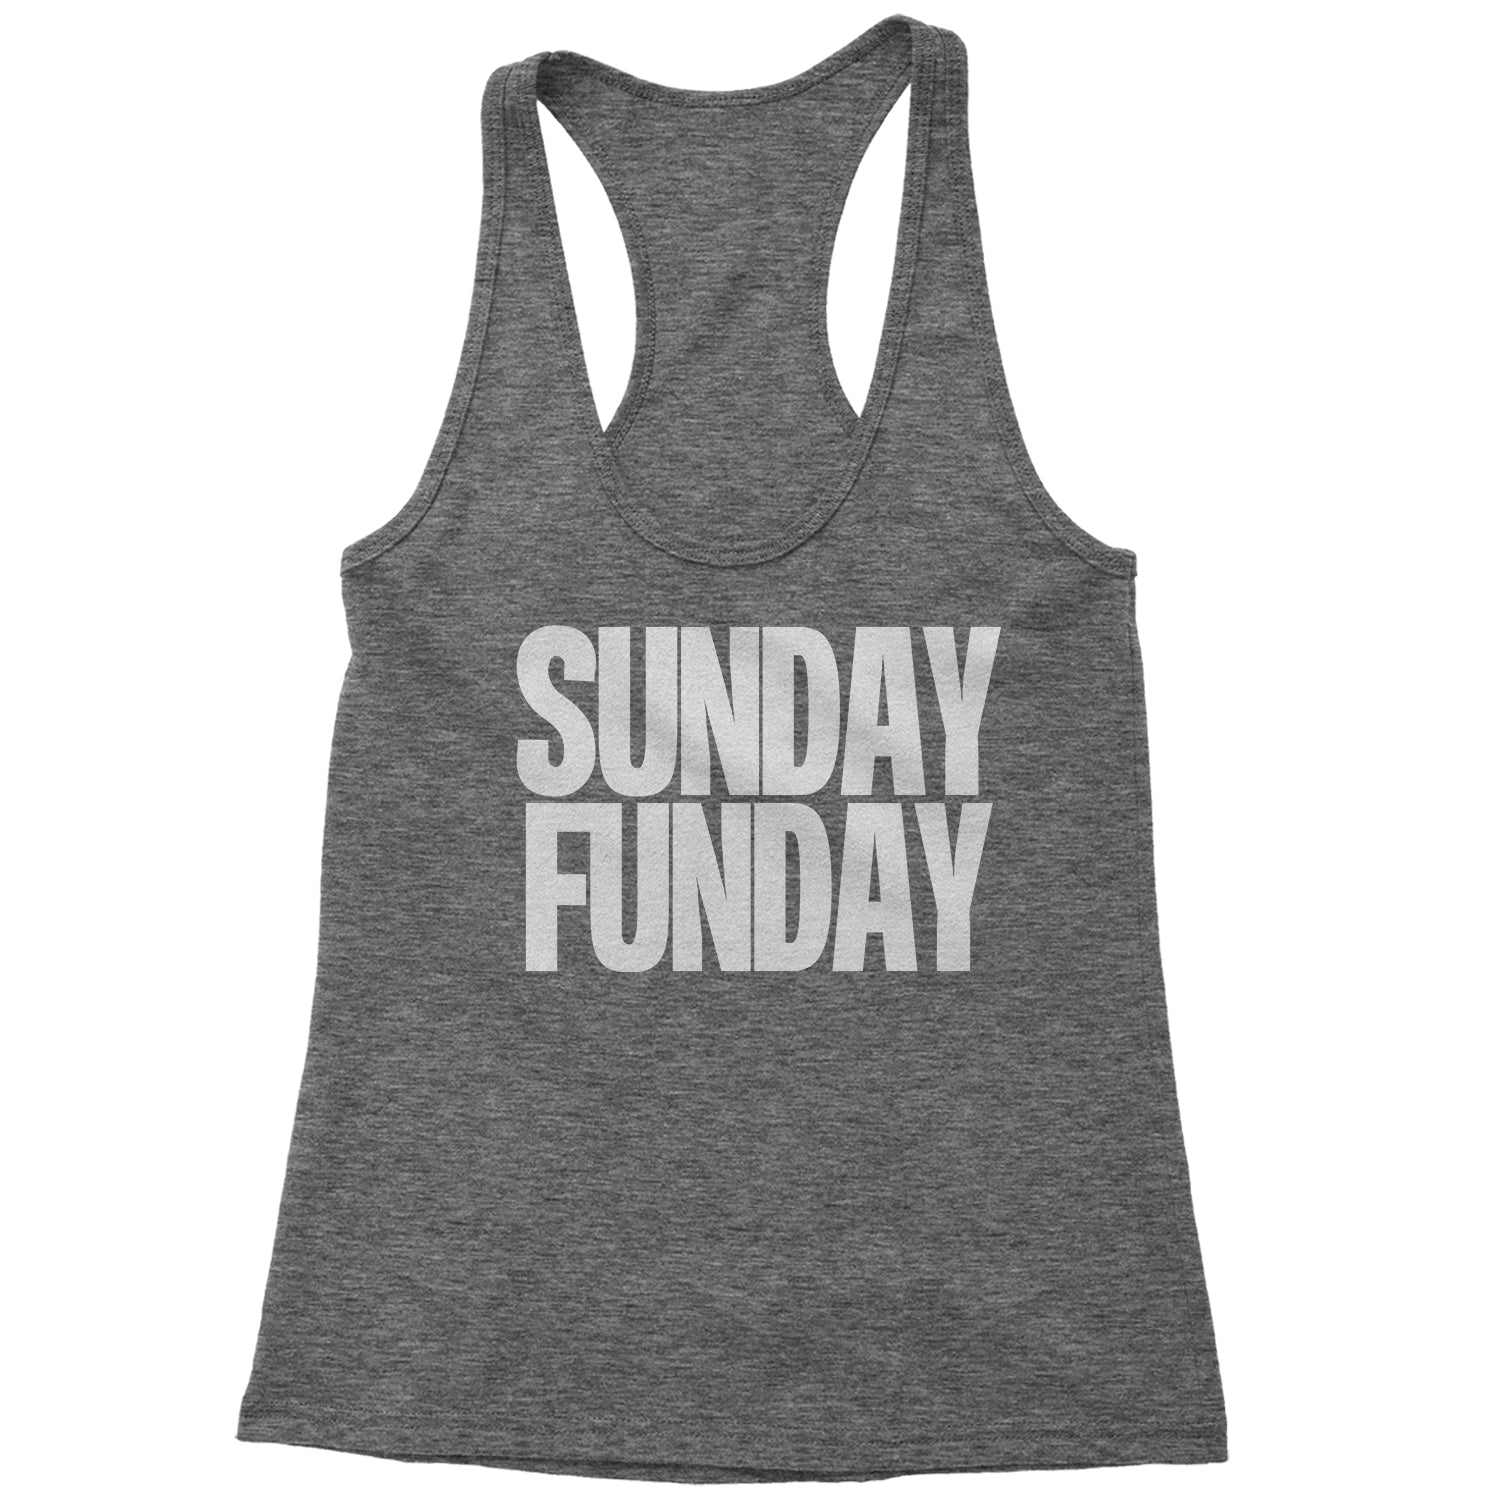 Sunday Funday Racerback Tank Top for Women - Expression Tees